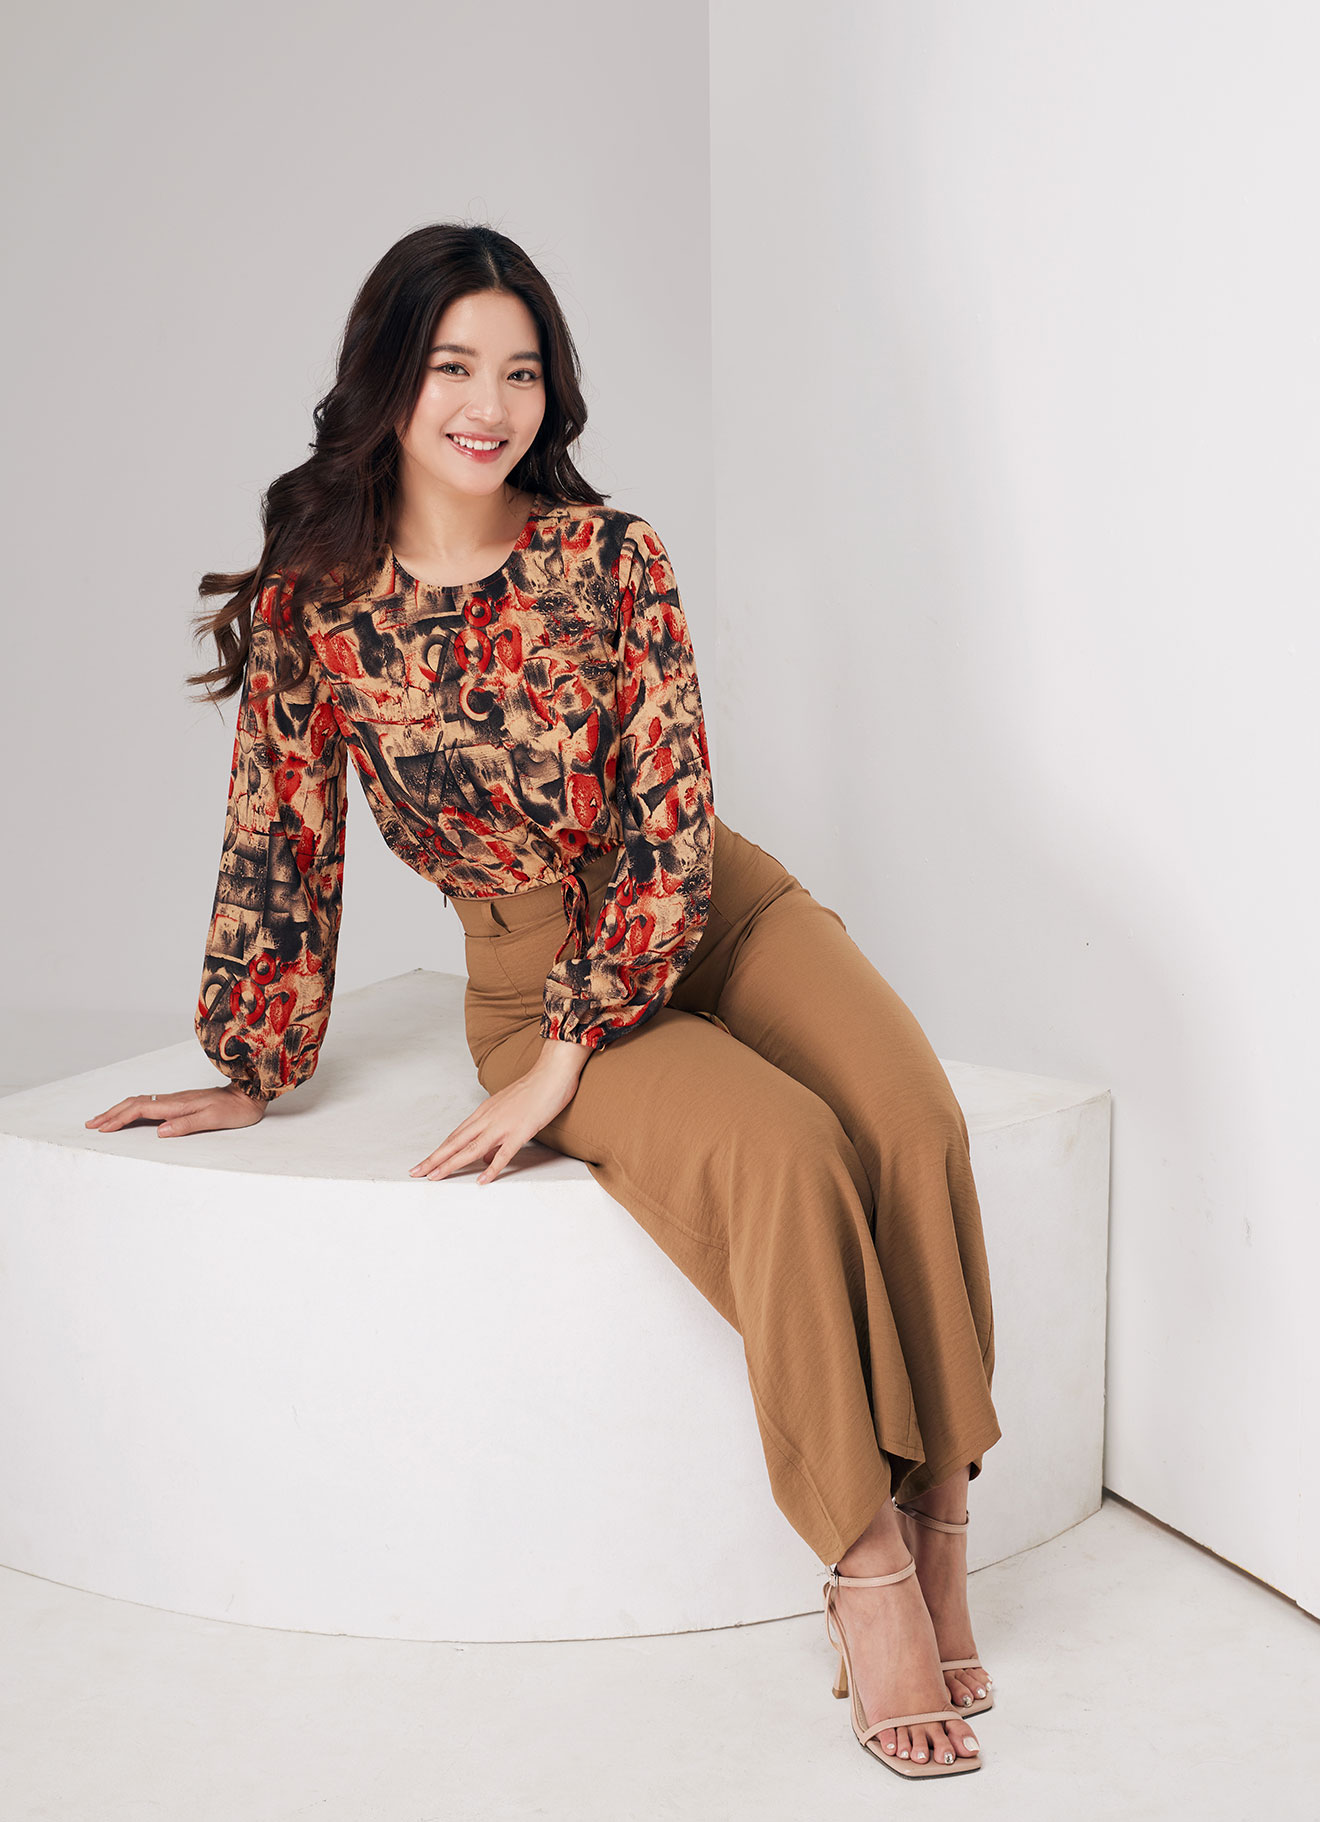 Fiery-Red by Printed Blouse